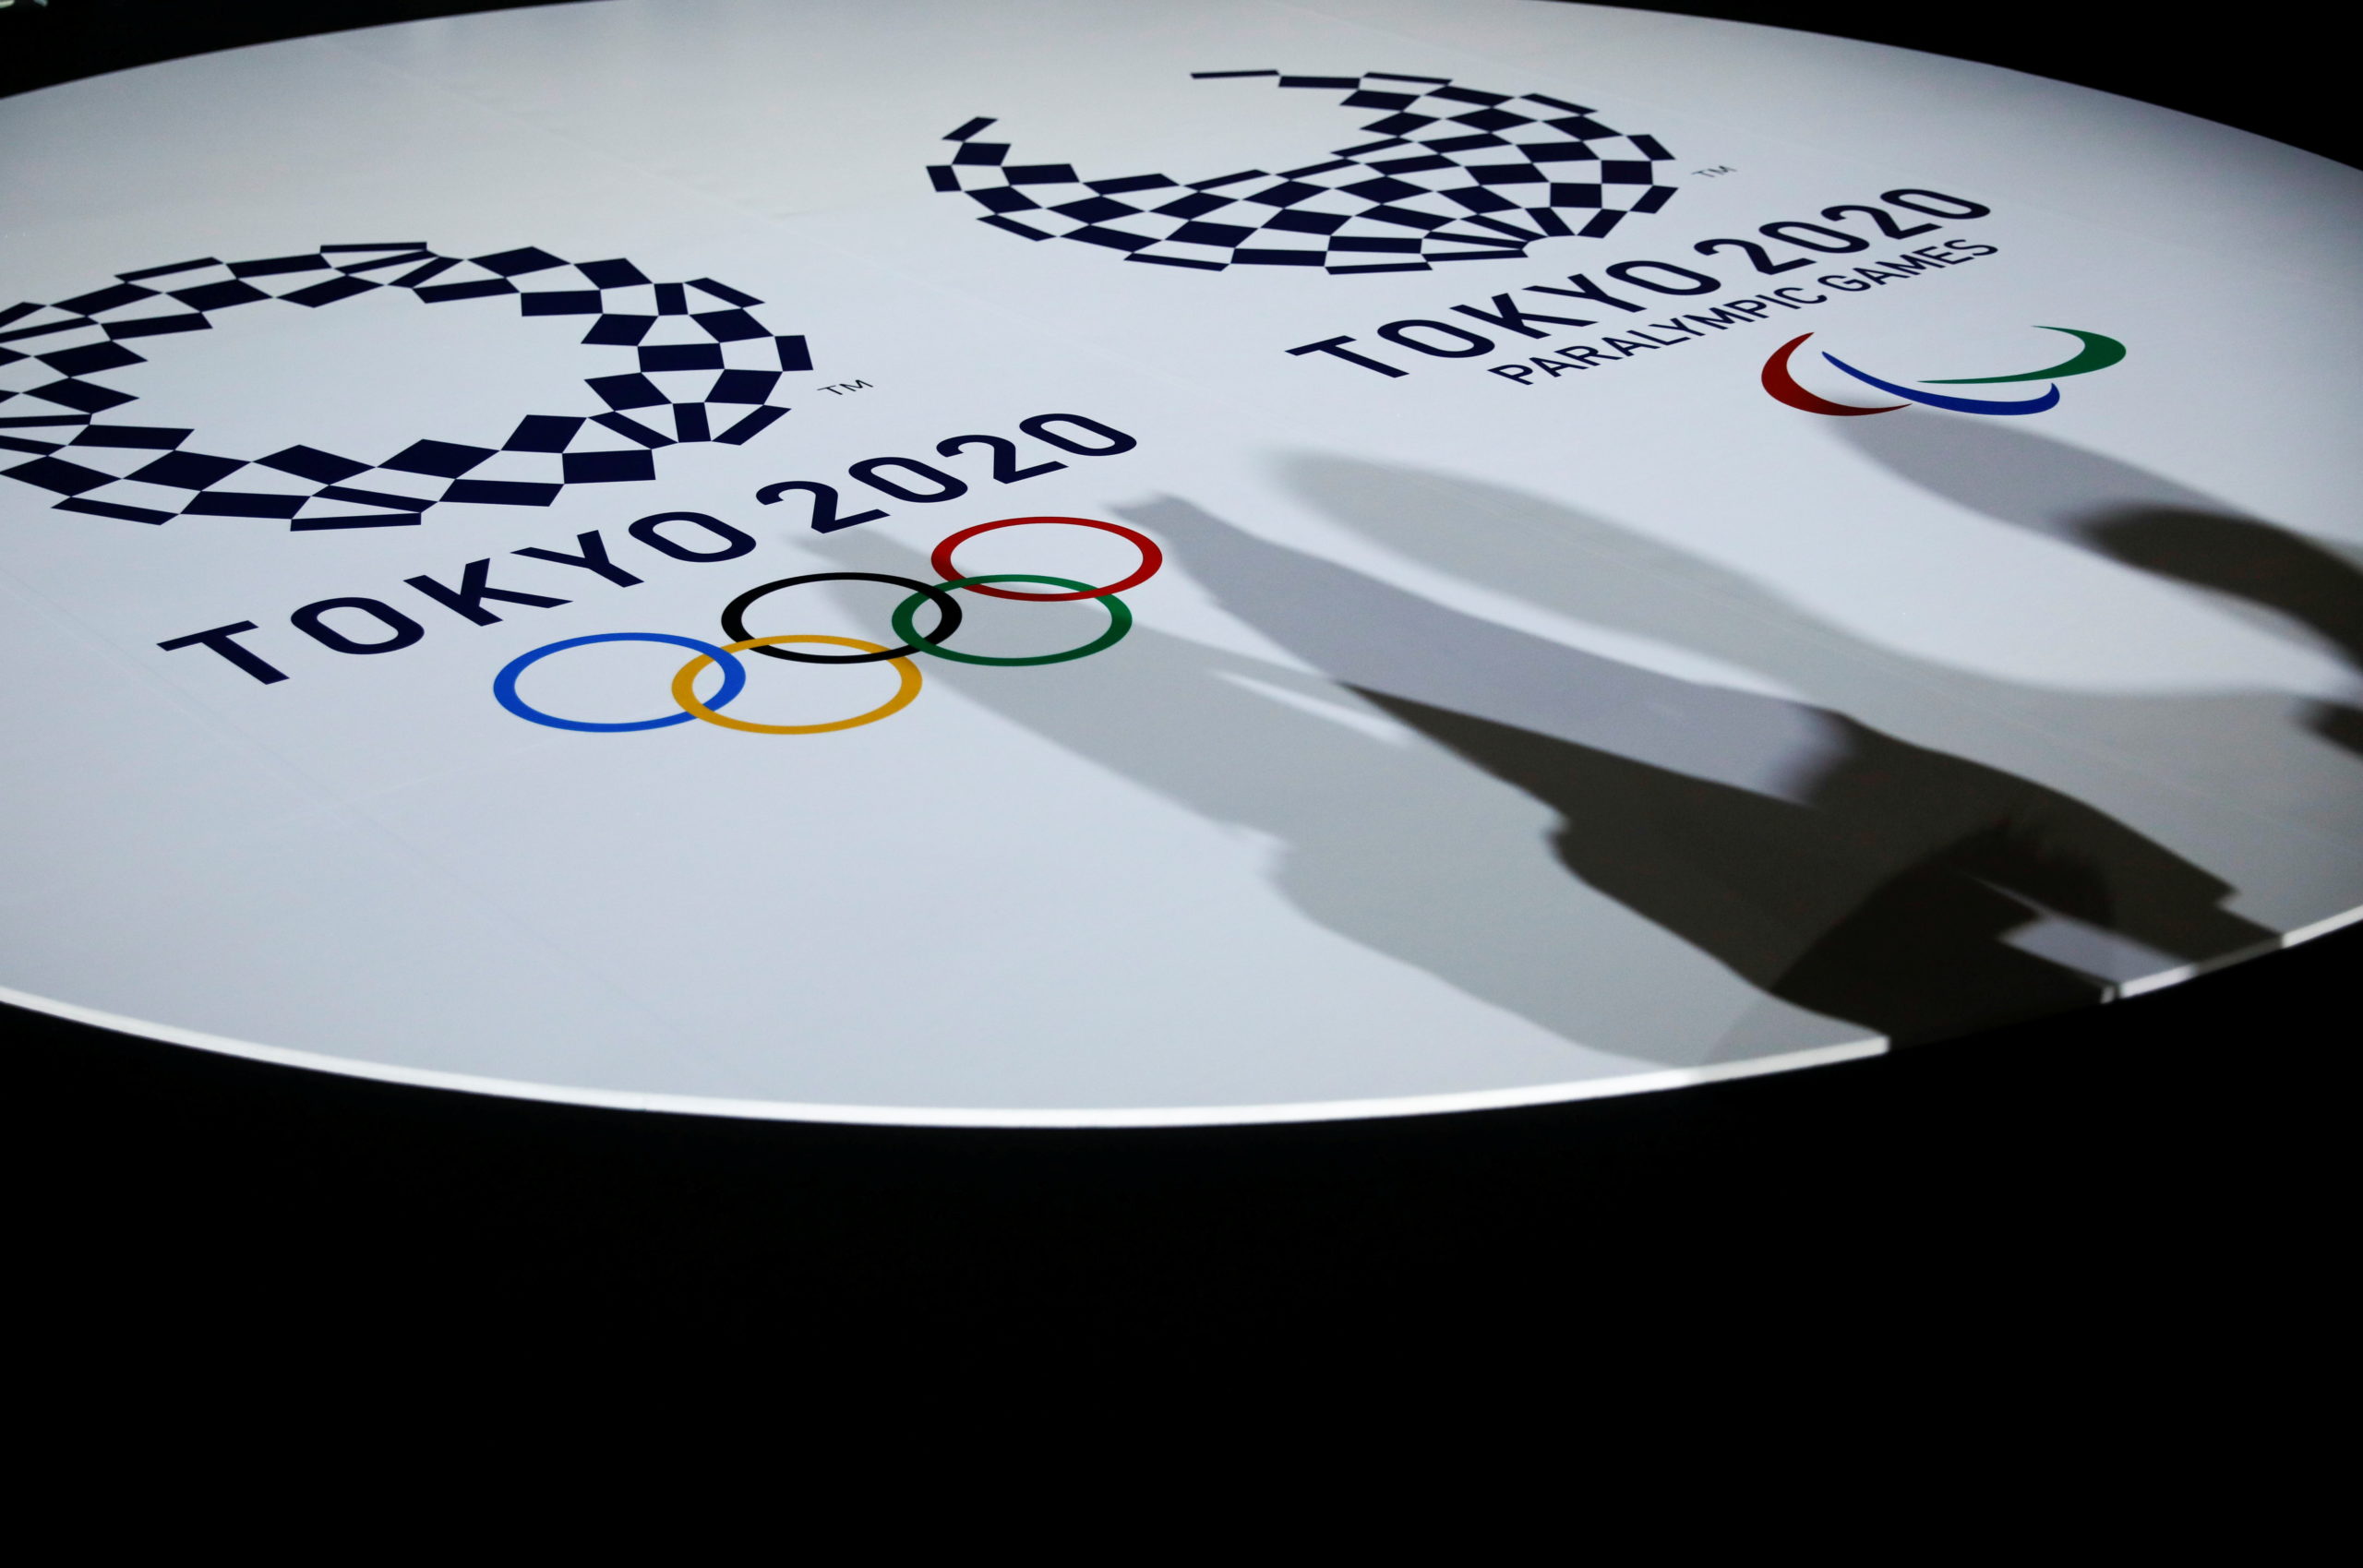 The emblems of the Tokyo 2020 Olympic and Paralympic Games are displayed during an unveiling event of the items that will be used for the victory ceremonies